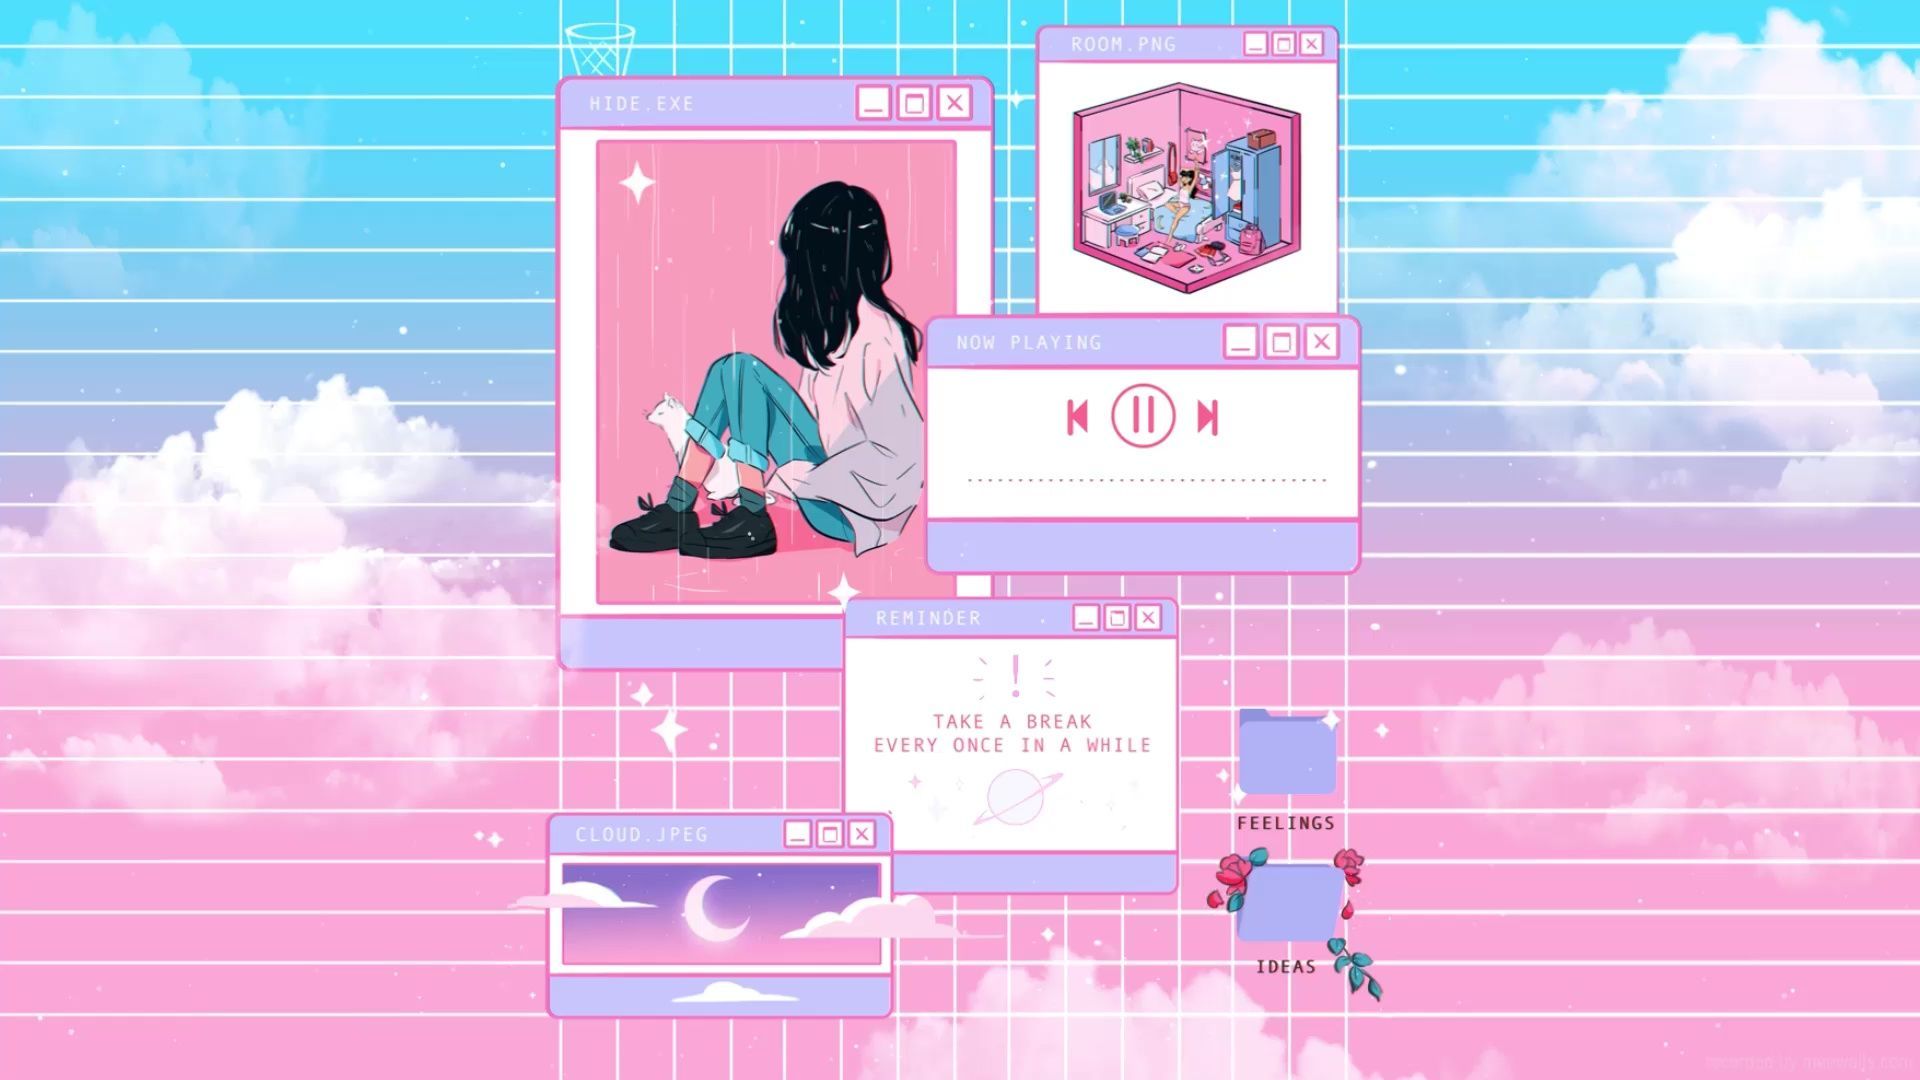 Aesthetic wallpaper with a girl sitting on the roof - Pink, Windows 10